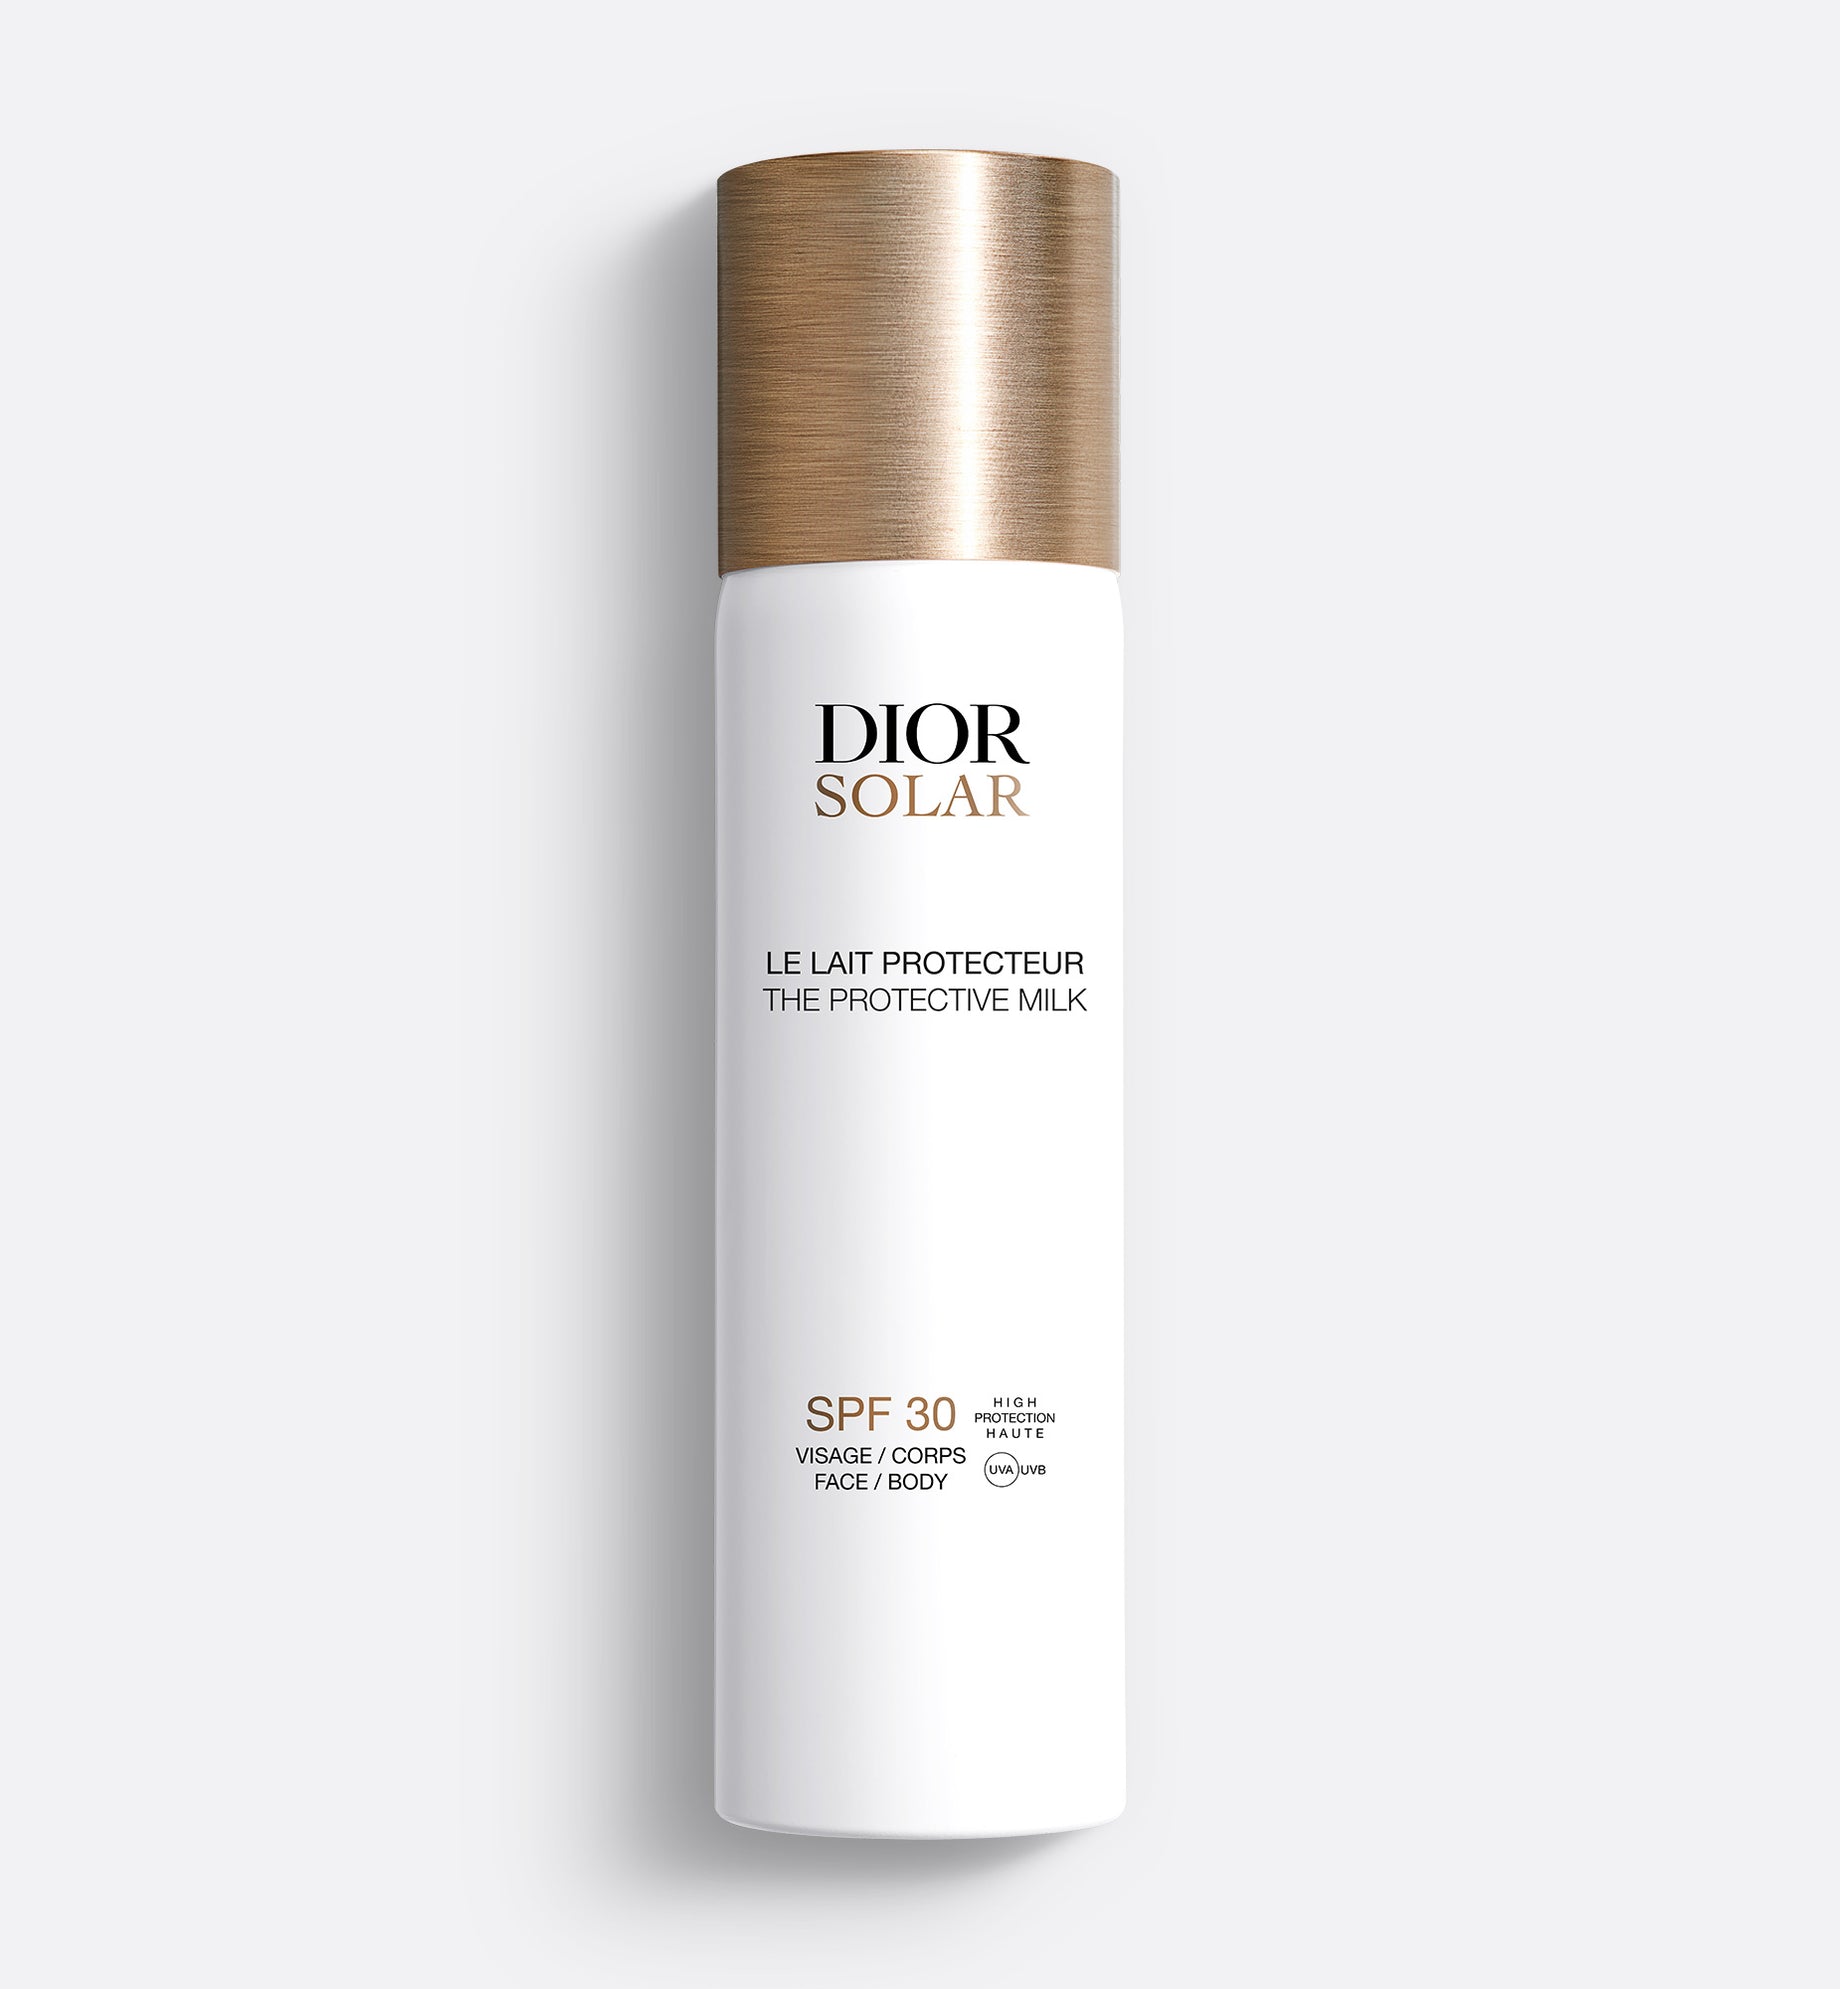 DIOR SOLAR THE PROTECTIVE MILK FOR FACE AND BODY